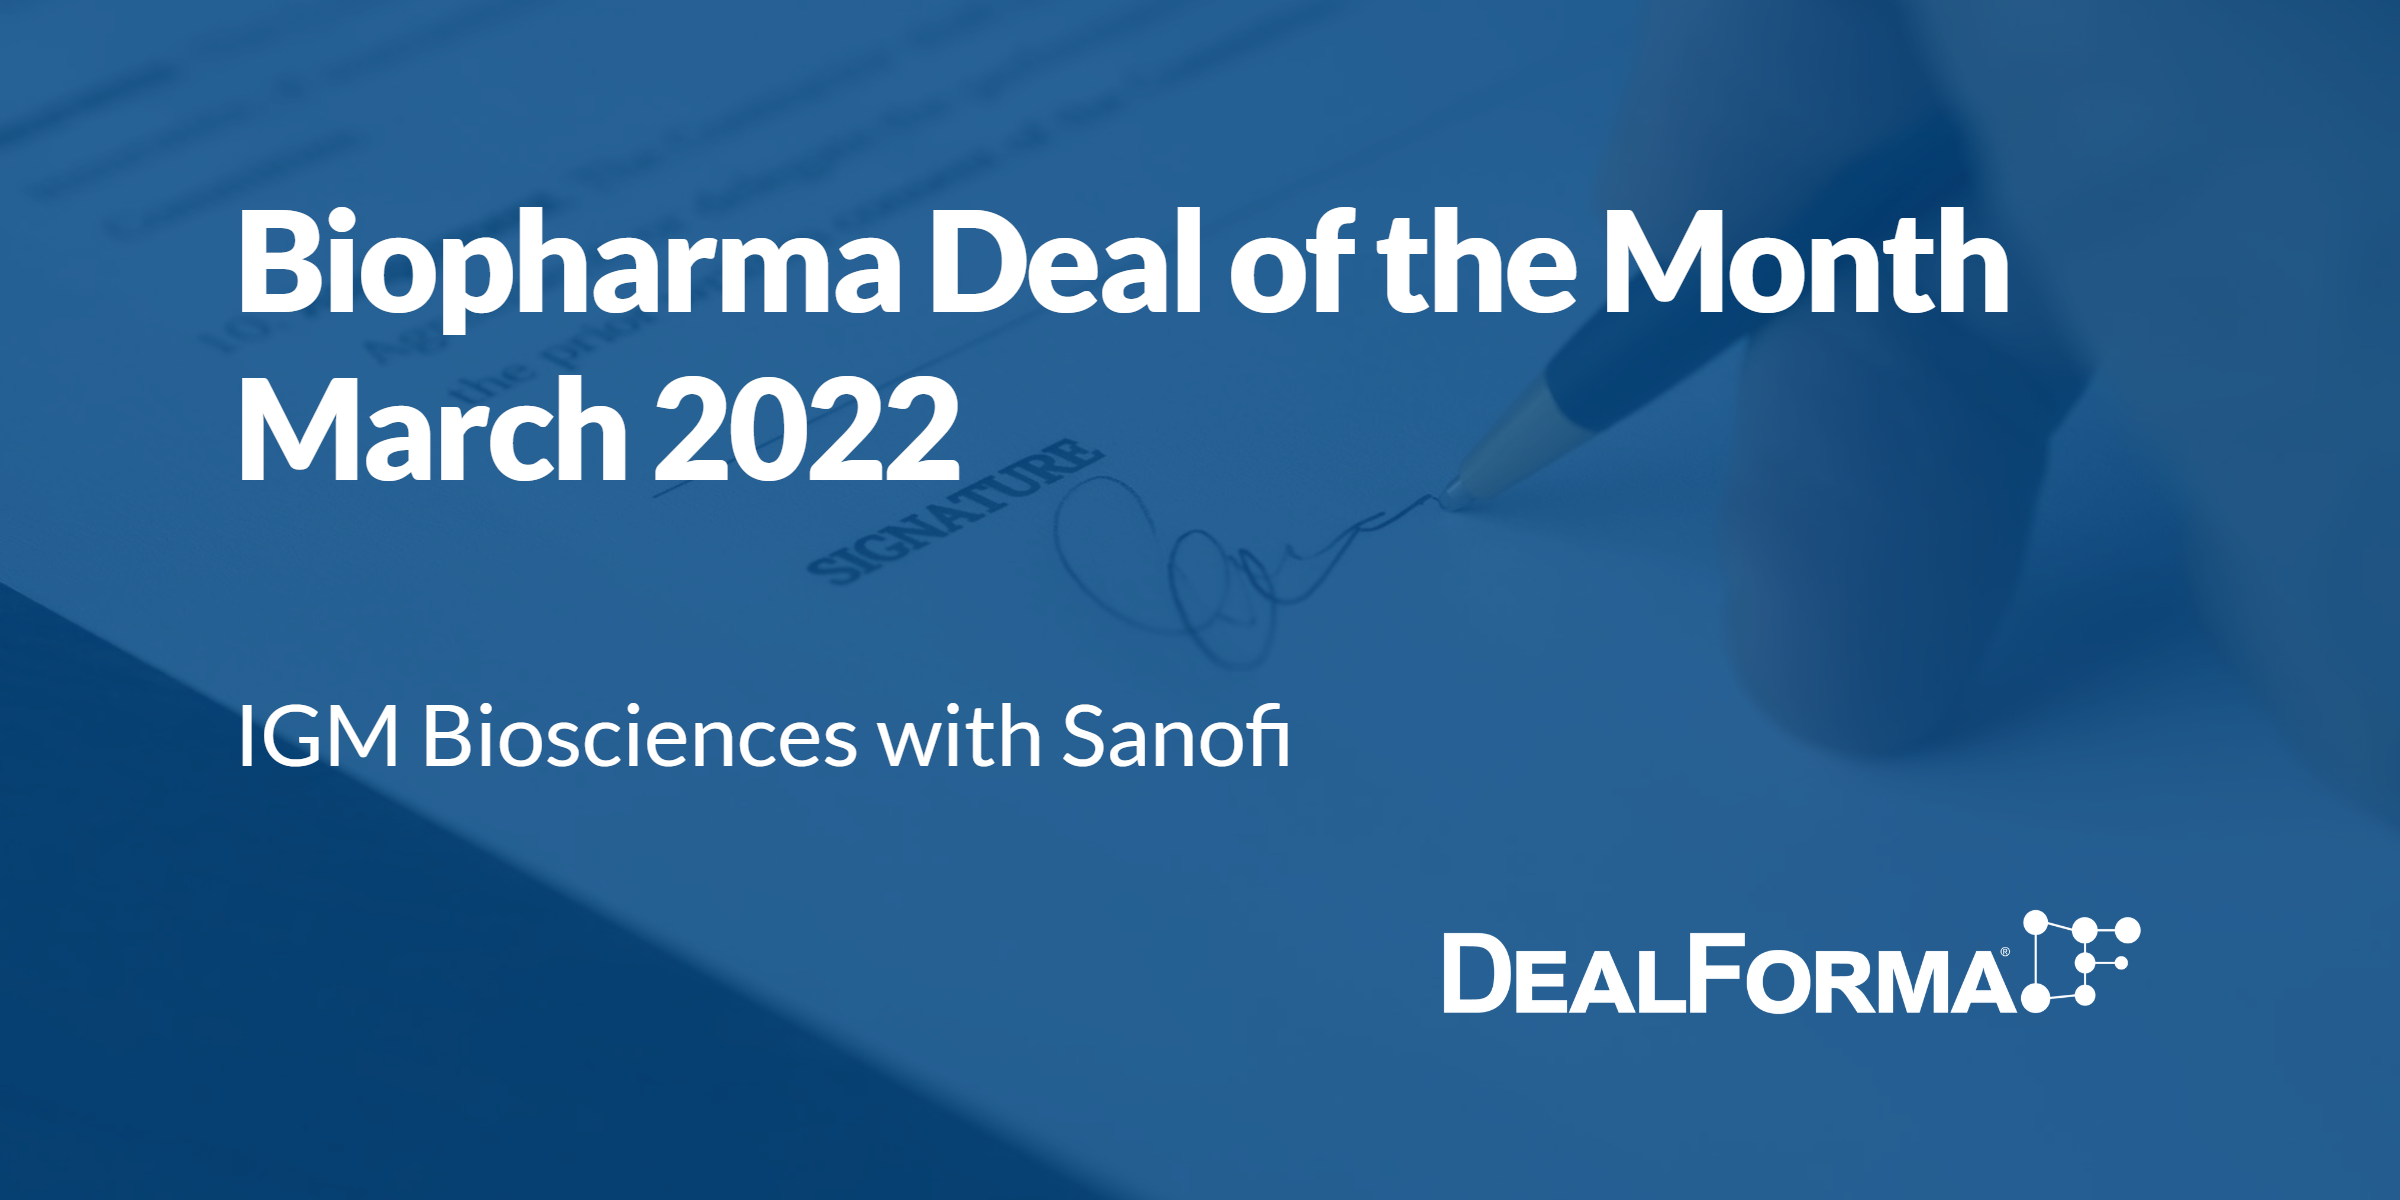 Top biopharma deal upfront March 2022